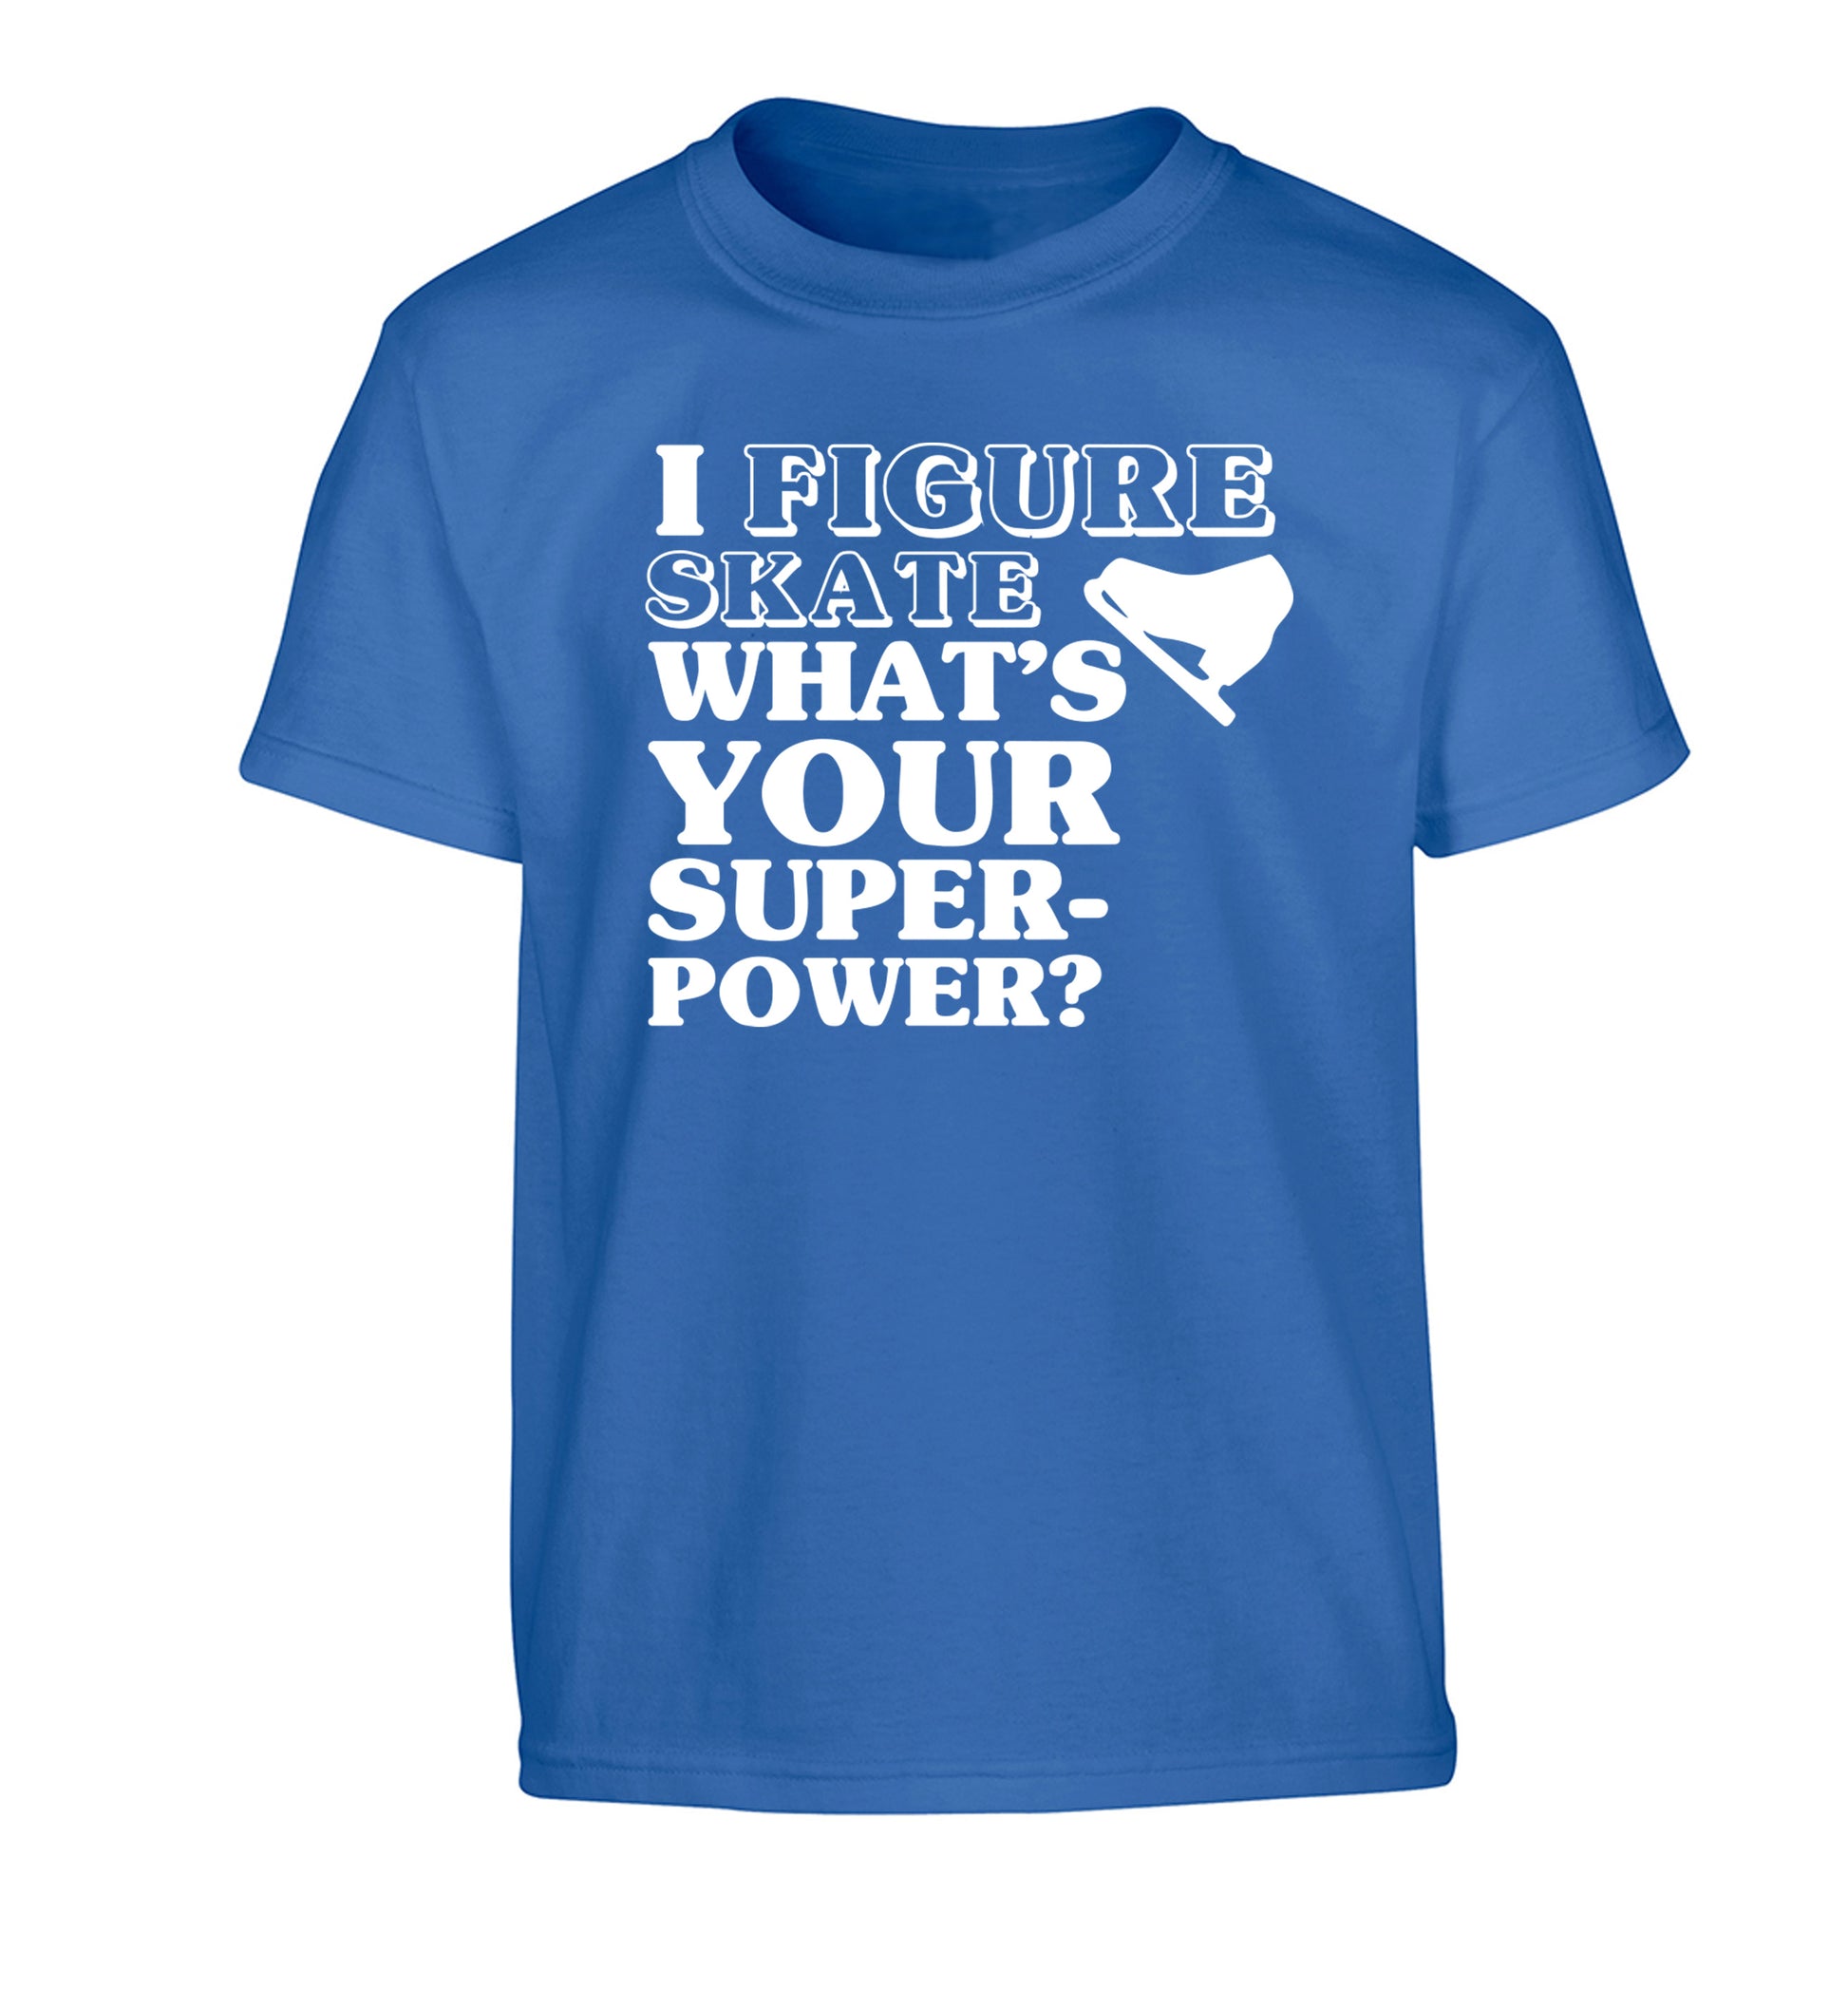 I figure skate what's your superpower? Children's blue Tshirt 12-14 Years